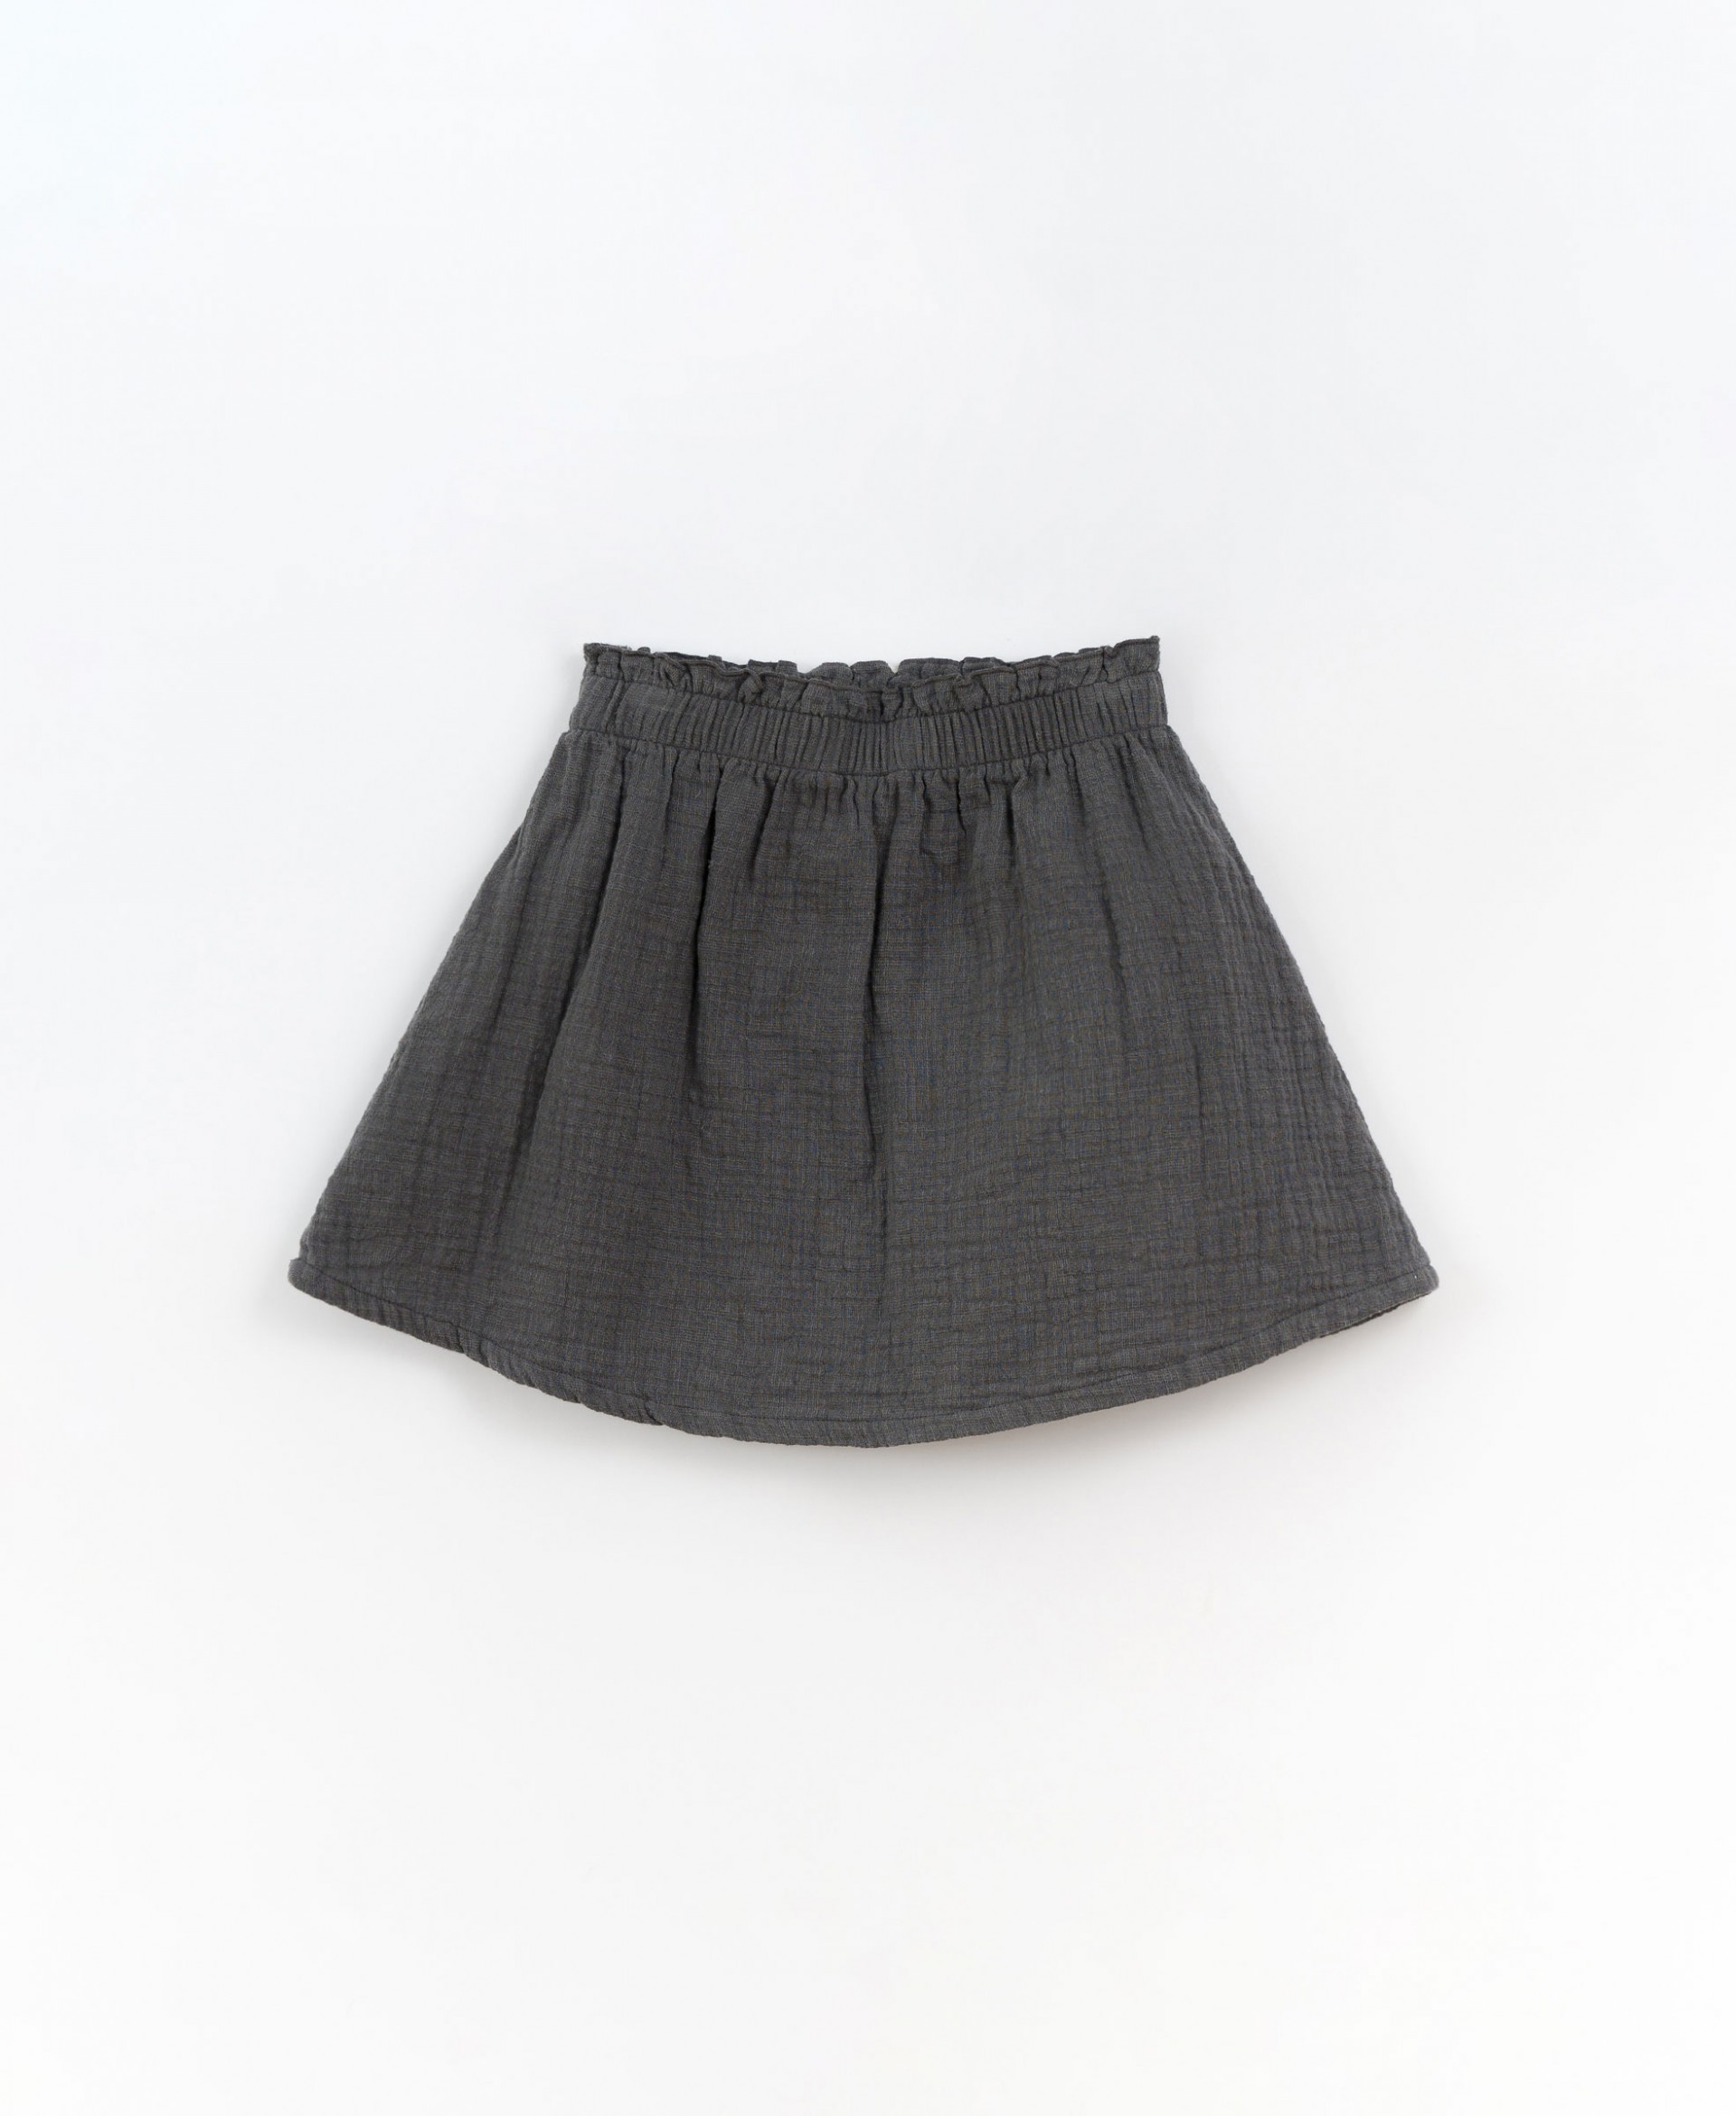 Cloth skirt with pocket | Culinary